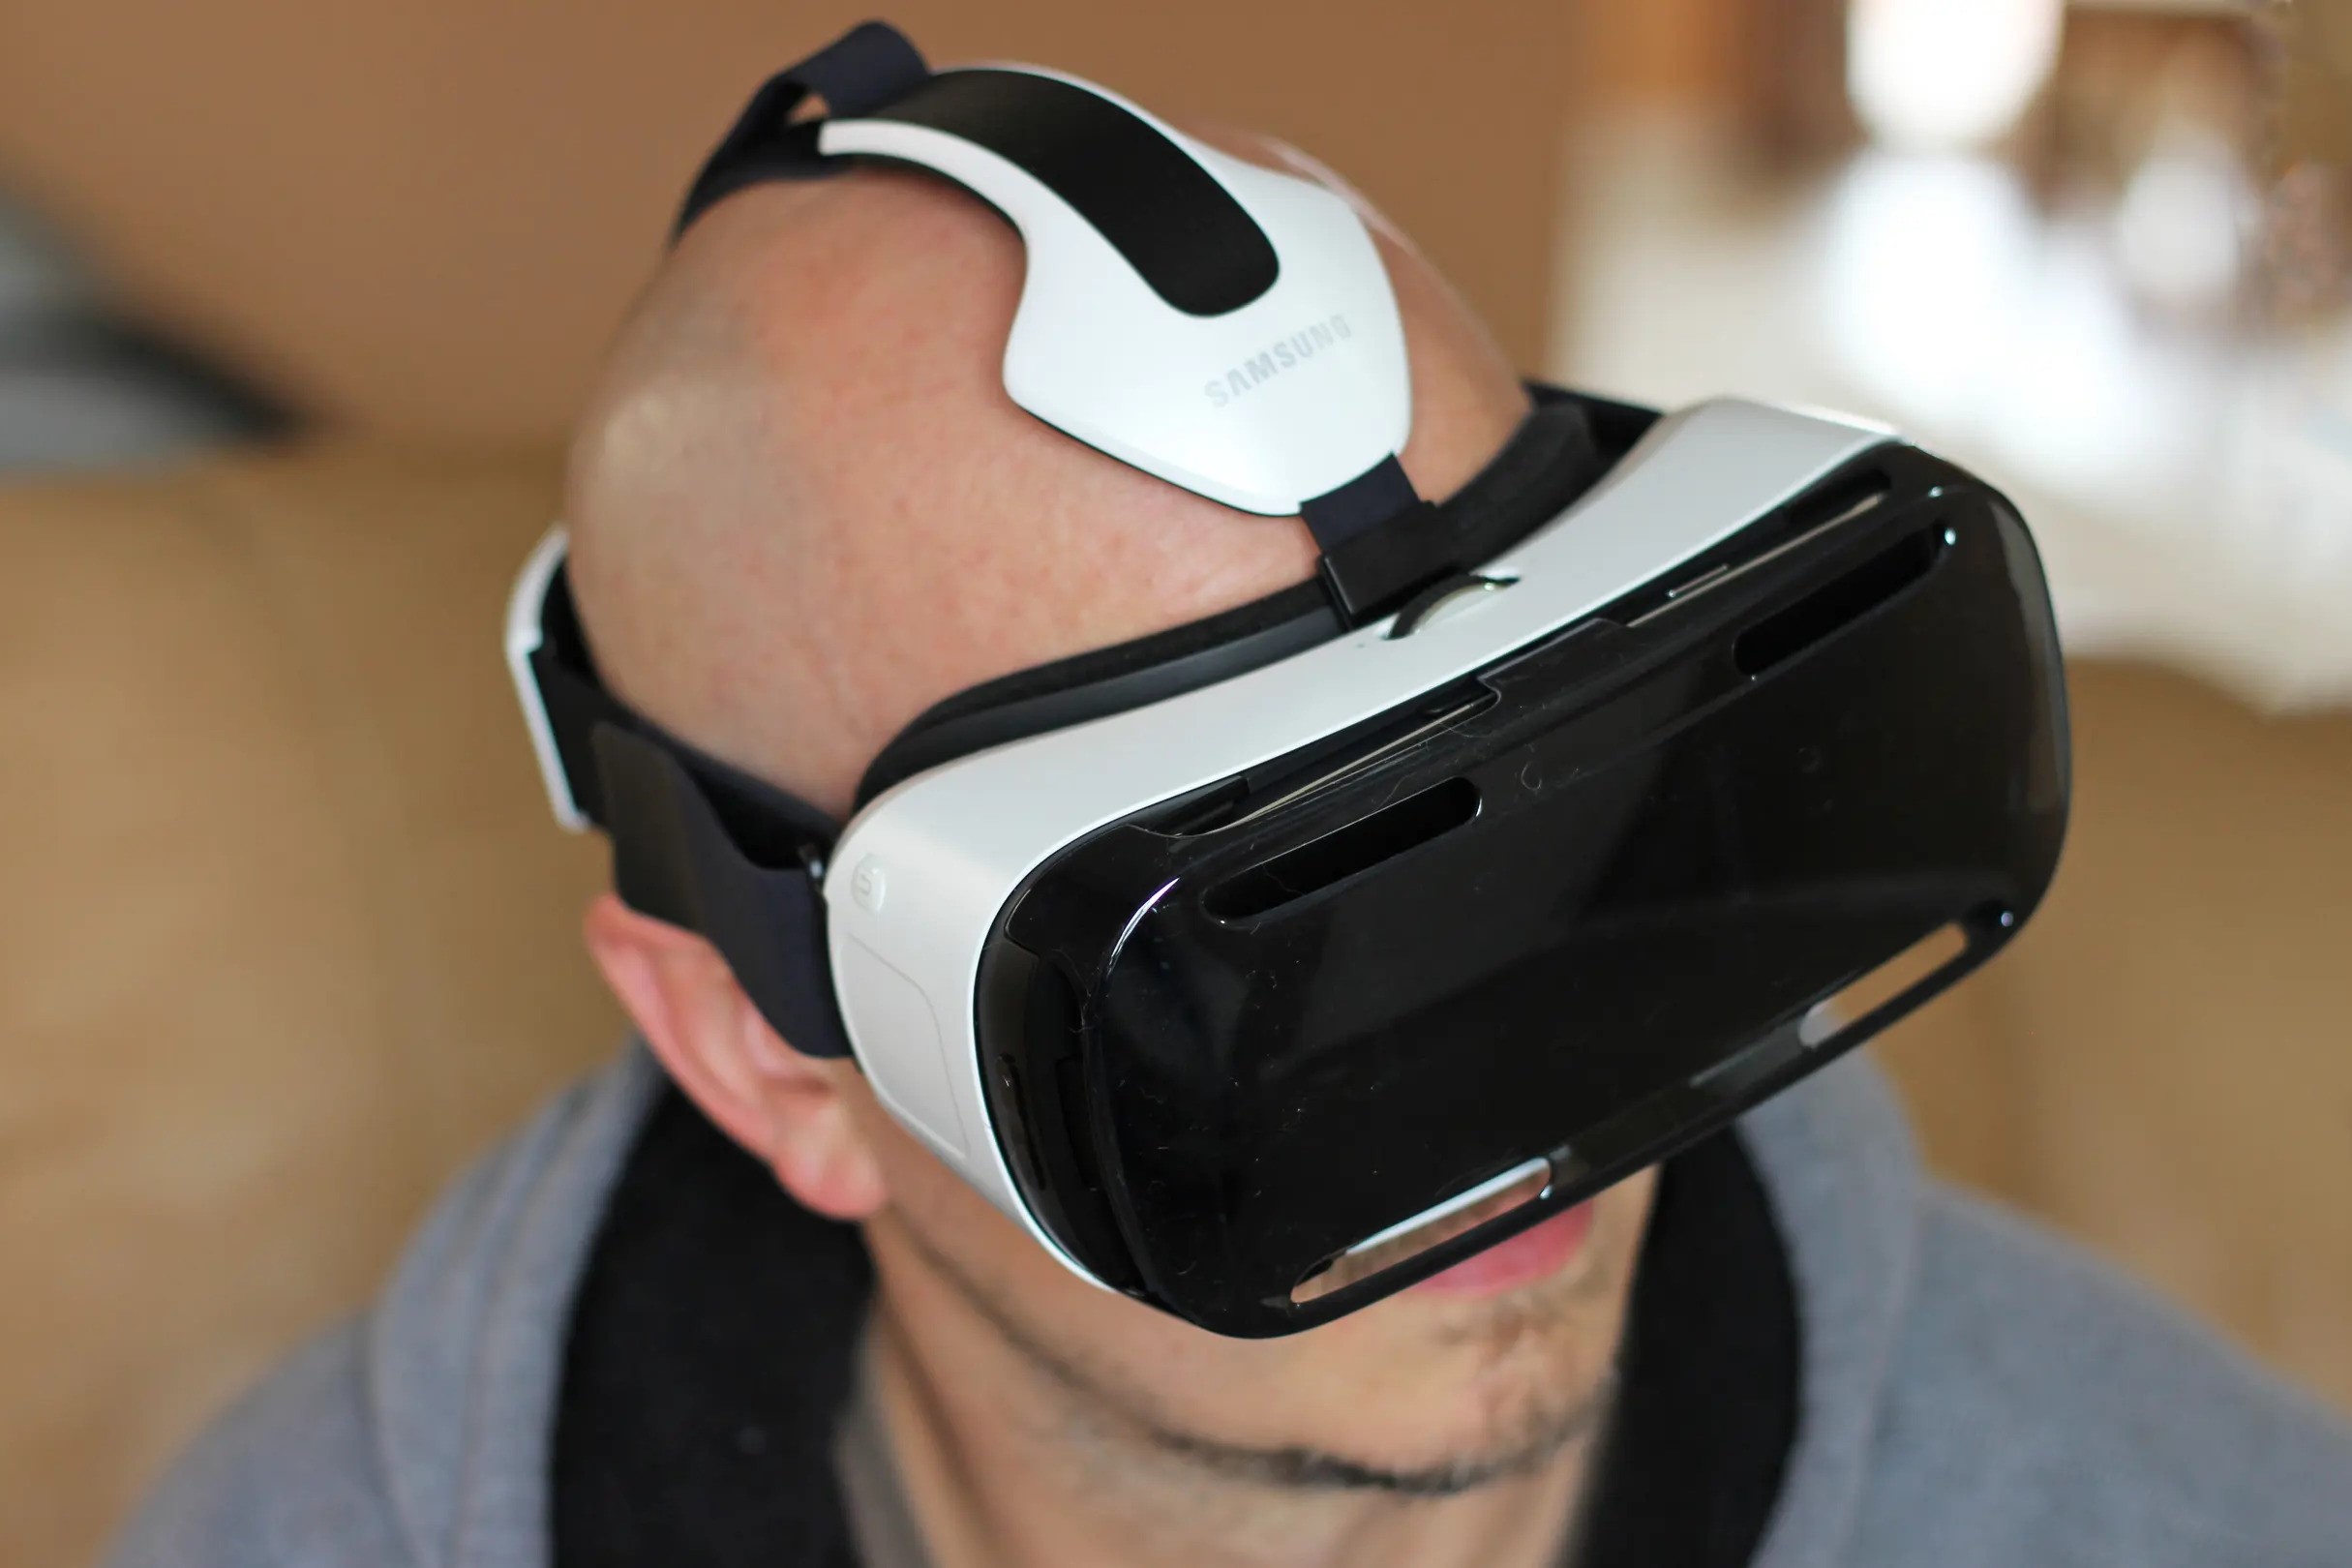 Samsung’s VR Offering: An Overview Of The Galaxy Gear VR